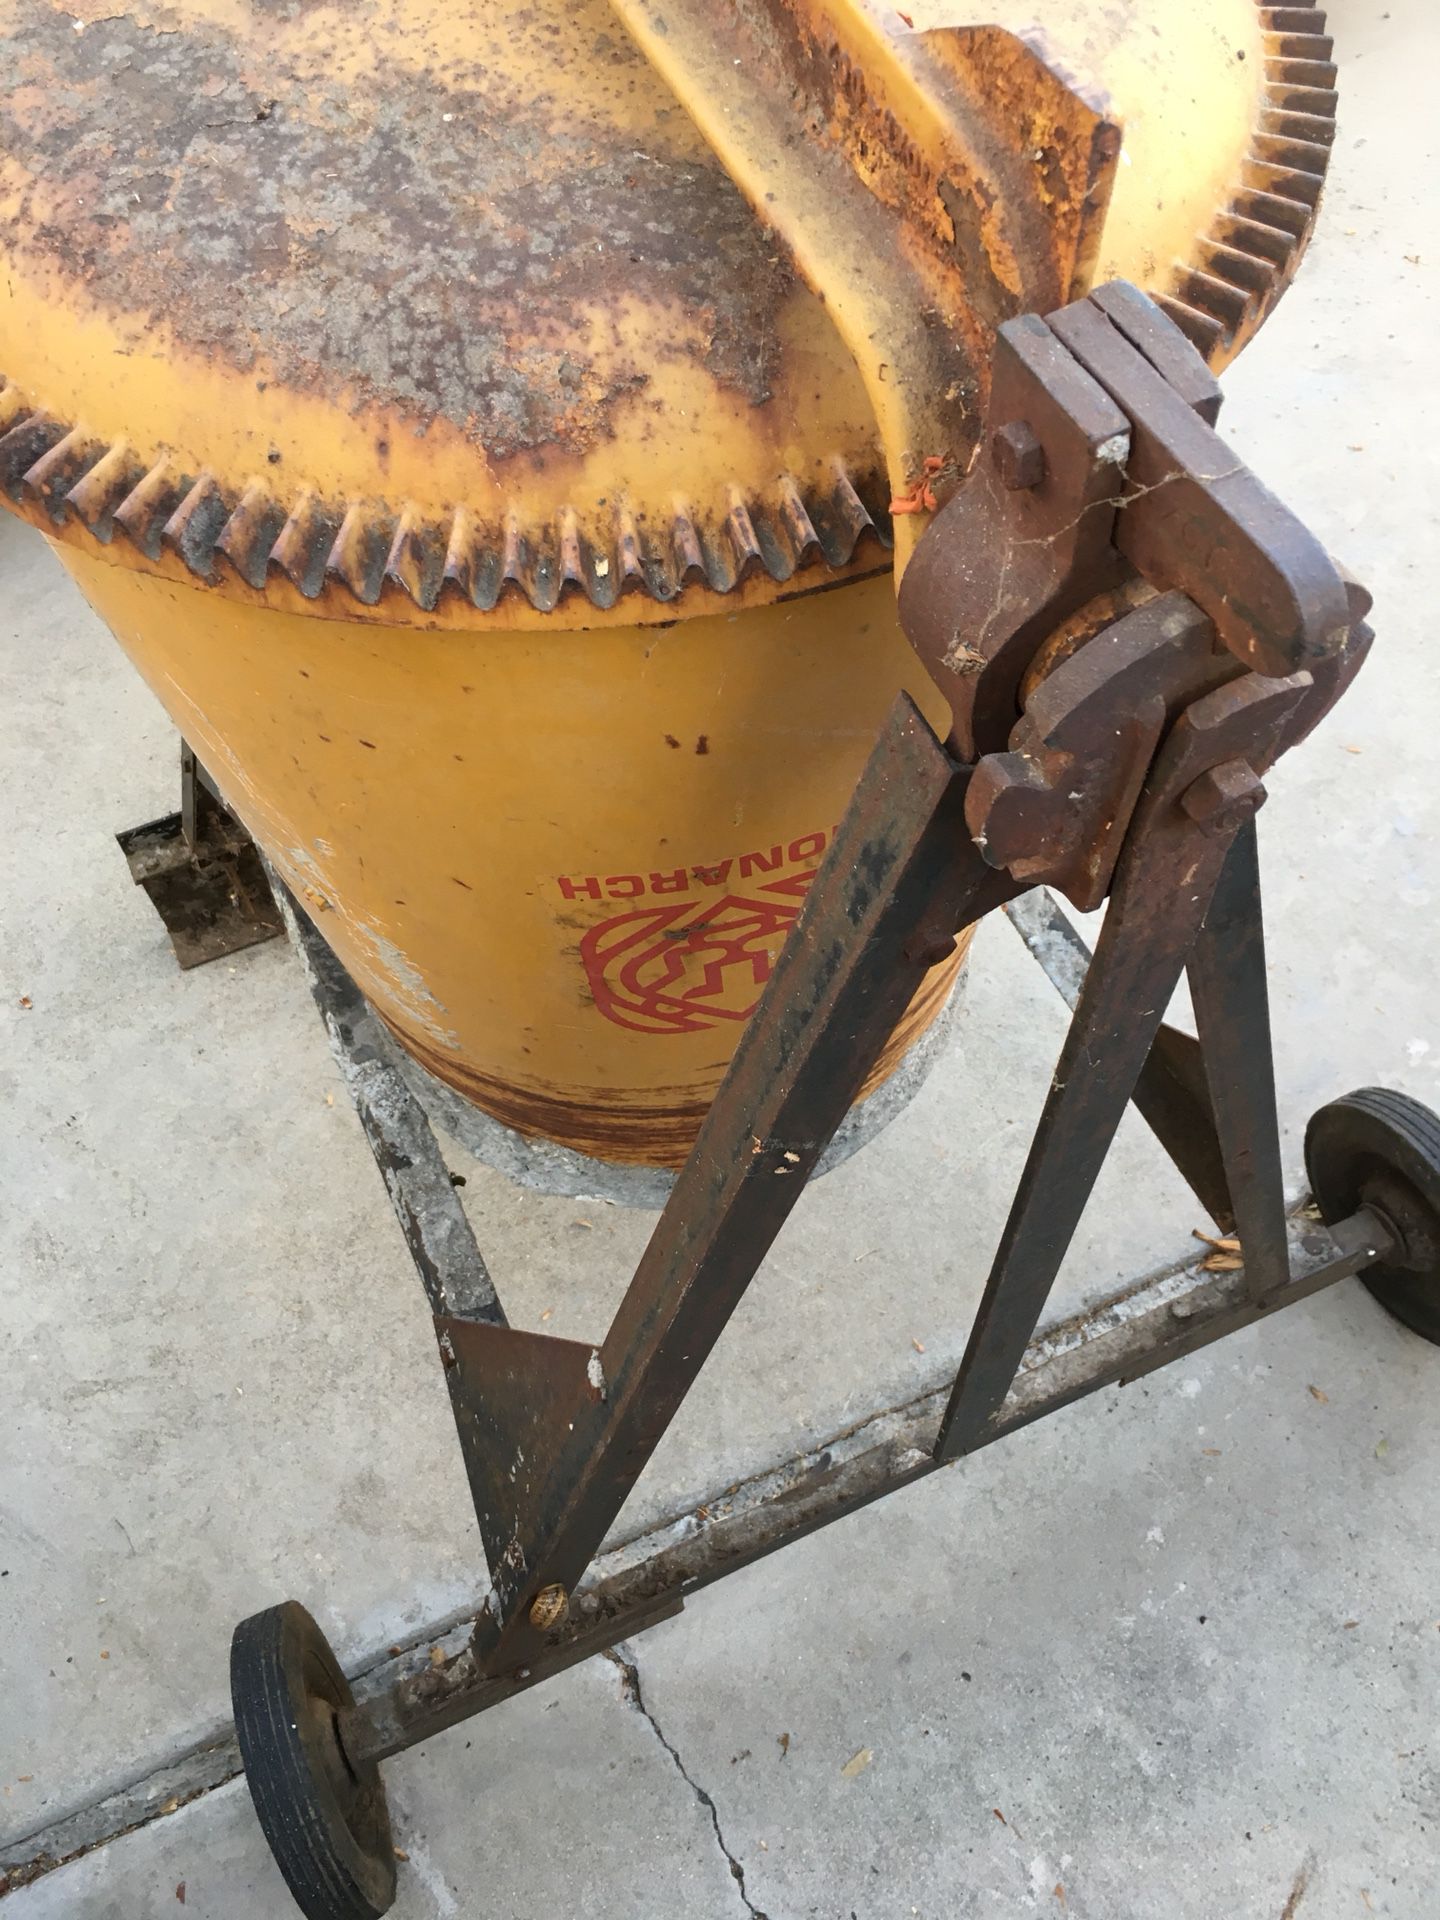 Concrete Weight Mold for Sale in Whittier, CA - OfferUp